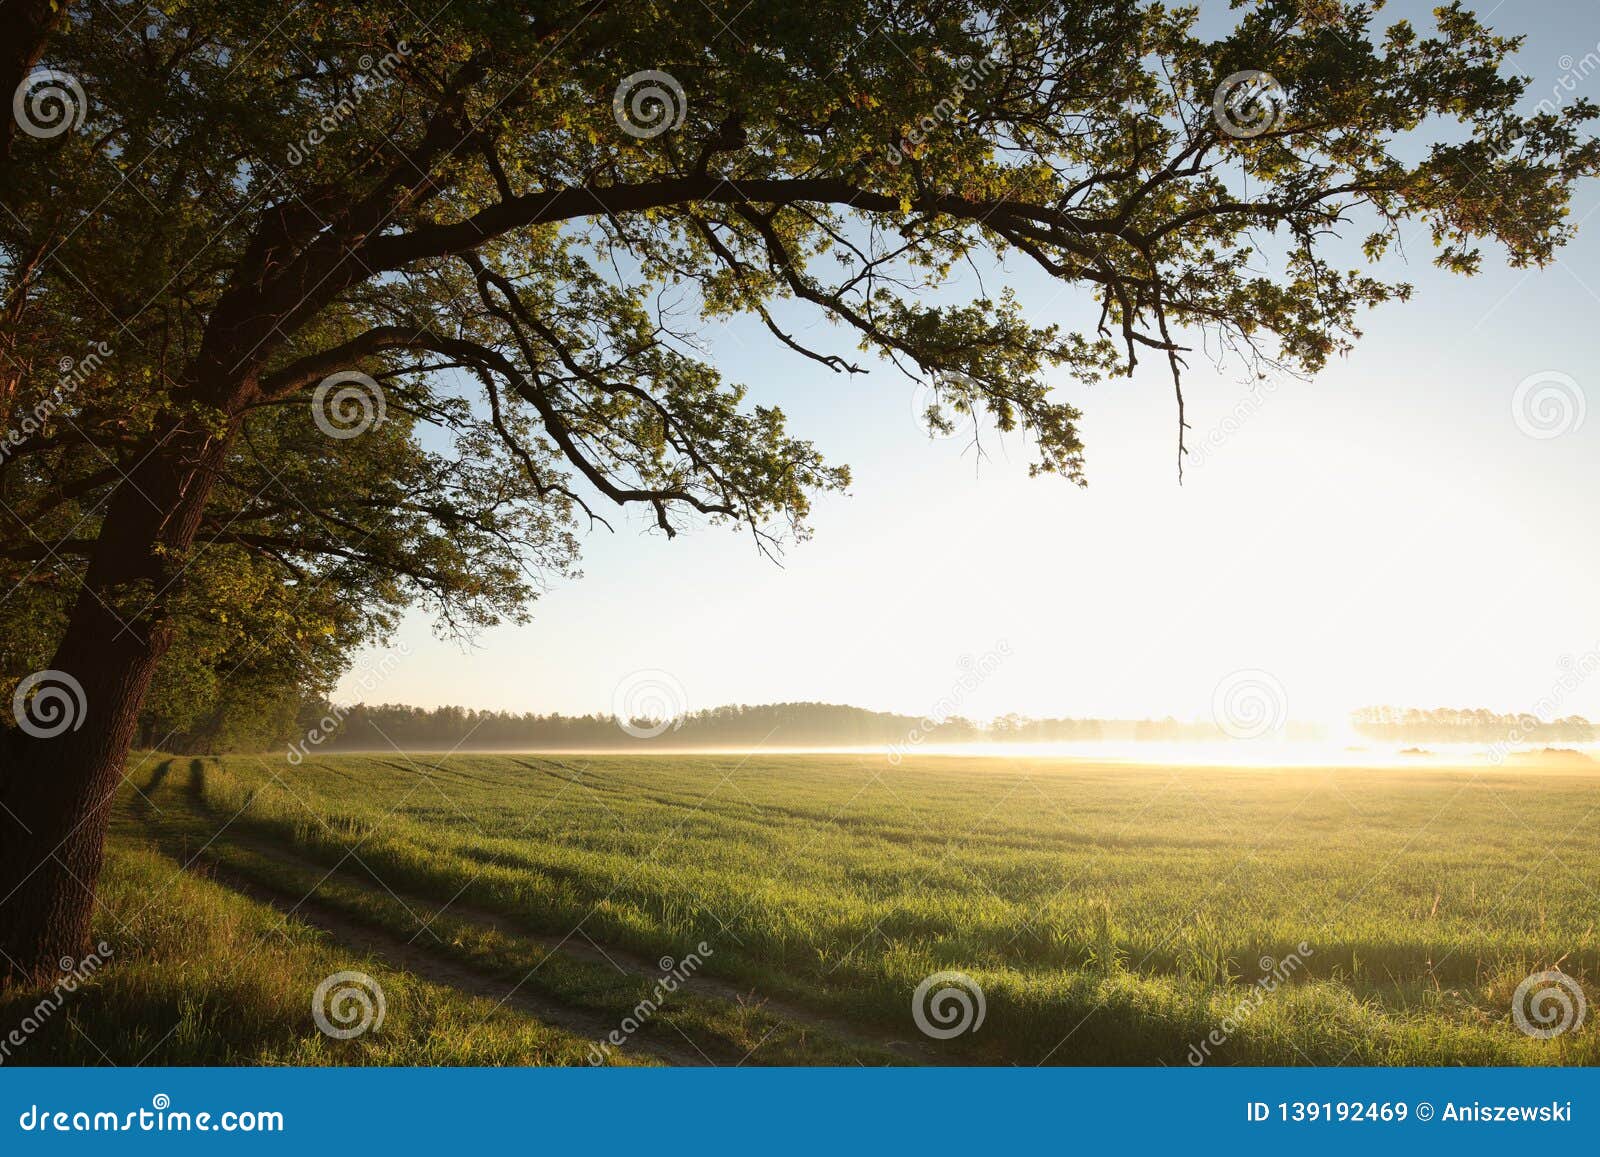 spring landscape at sunrise silhouette of oak trees at the edge of the forest lit by the rising sun morning mist rises over a